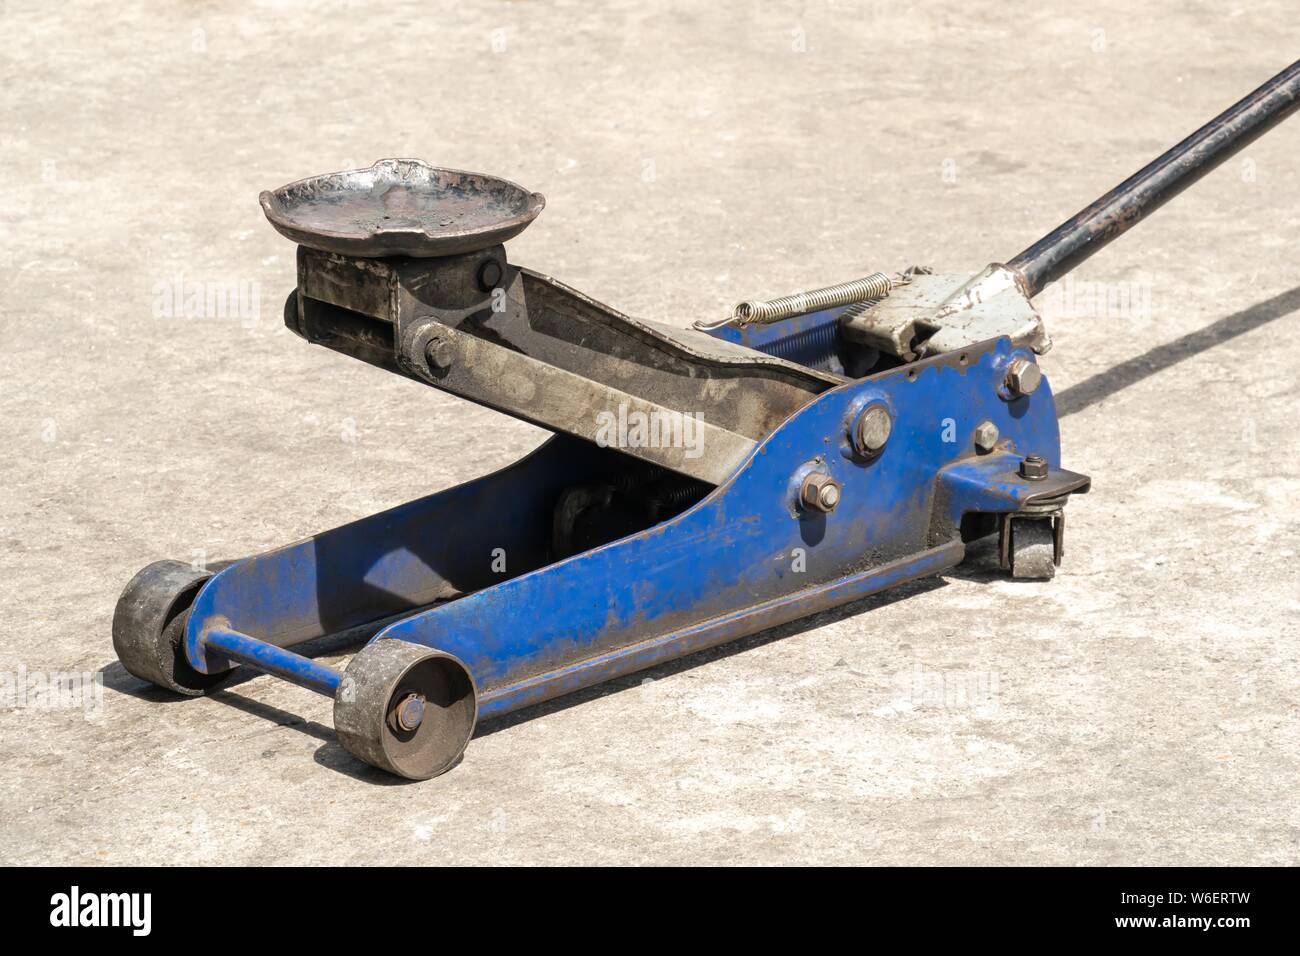 Used hydraulic vehicle jack or vehicle lifting for inspection of vehicle underbody, brake repairs. Stock Photo